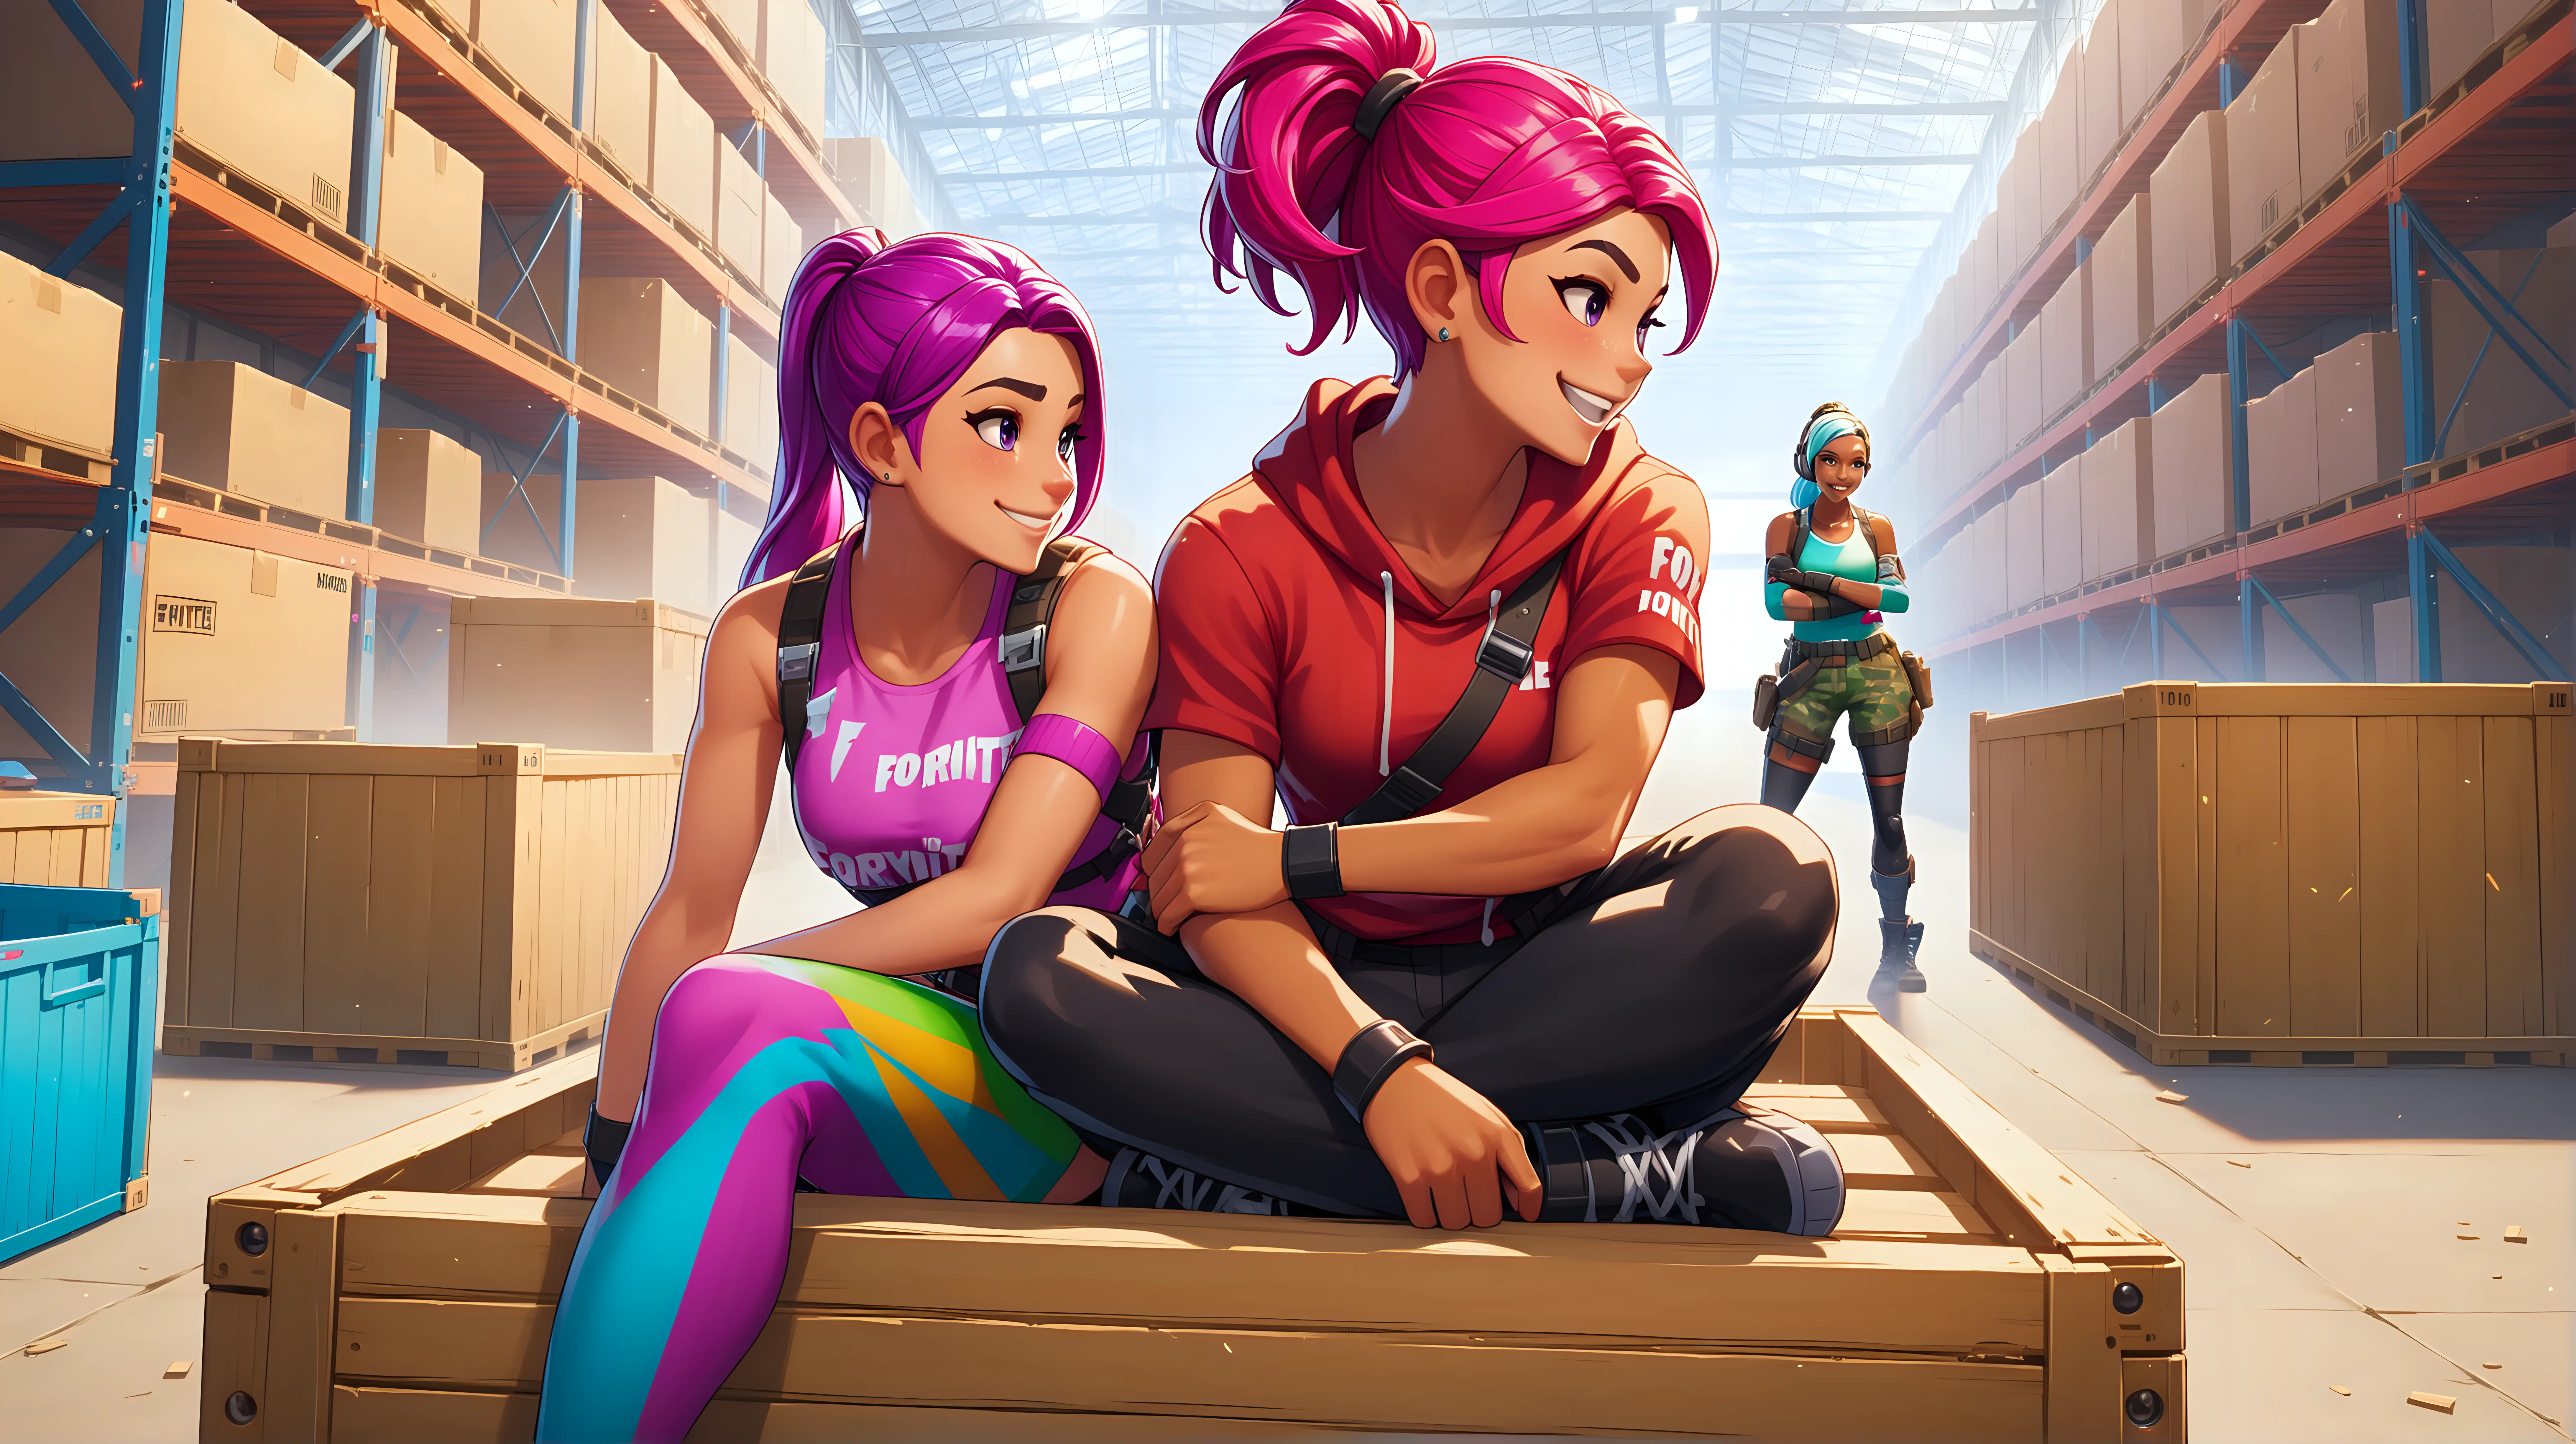 Colorful Fortnite Characters Sitting in Warehouse with Fighting in Background